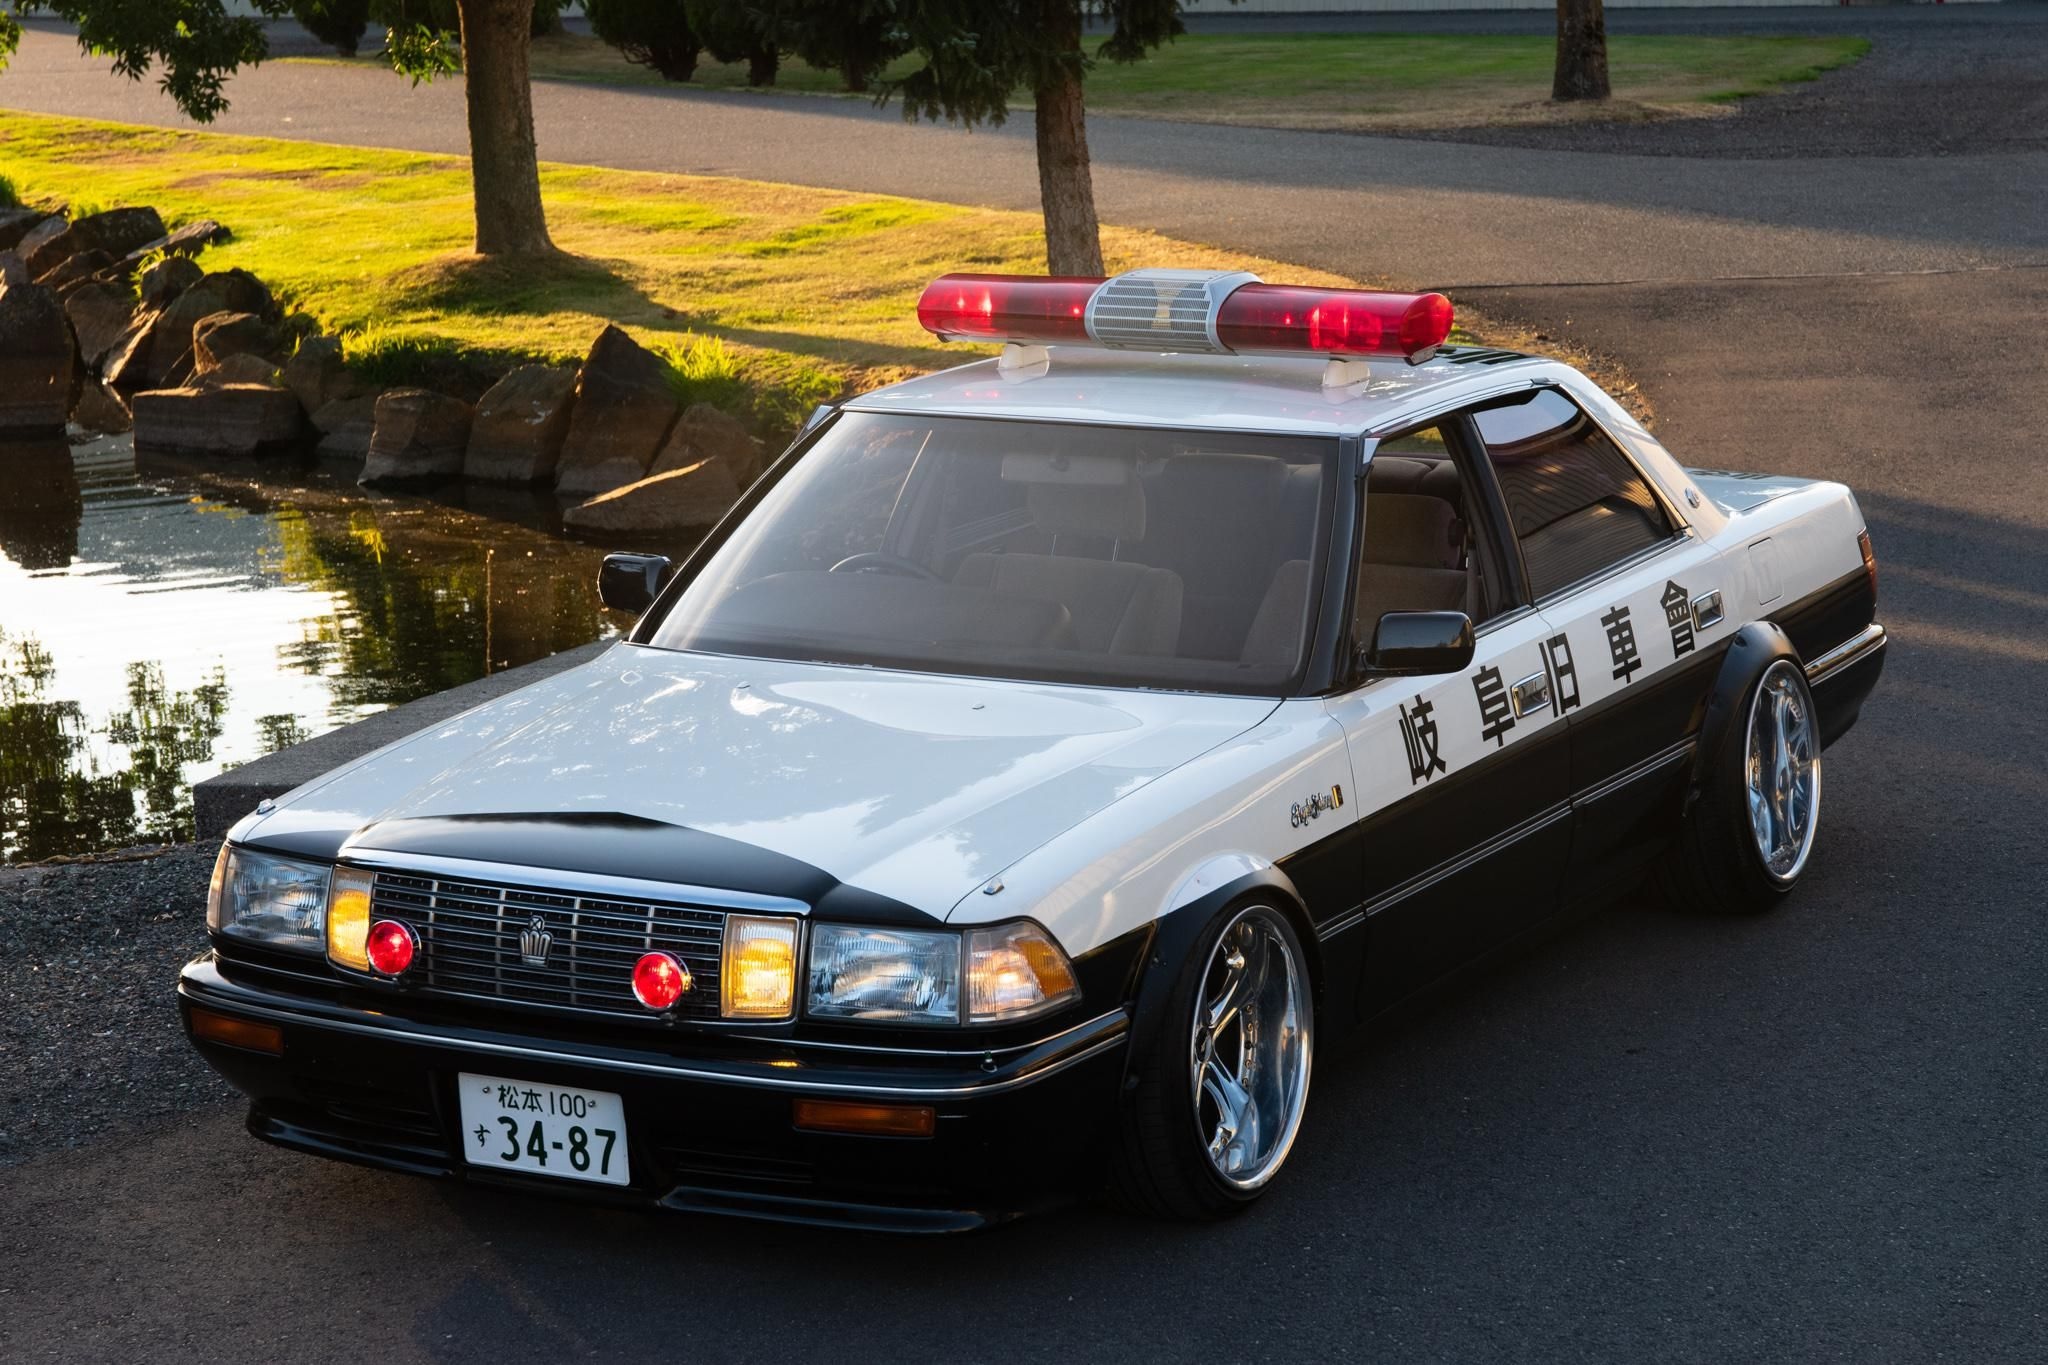 A 1991 Toyota modified to resemble a black-and-white Japanese police car parked next to a pond